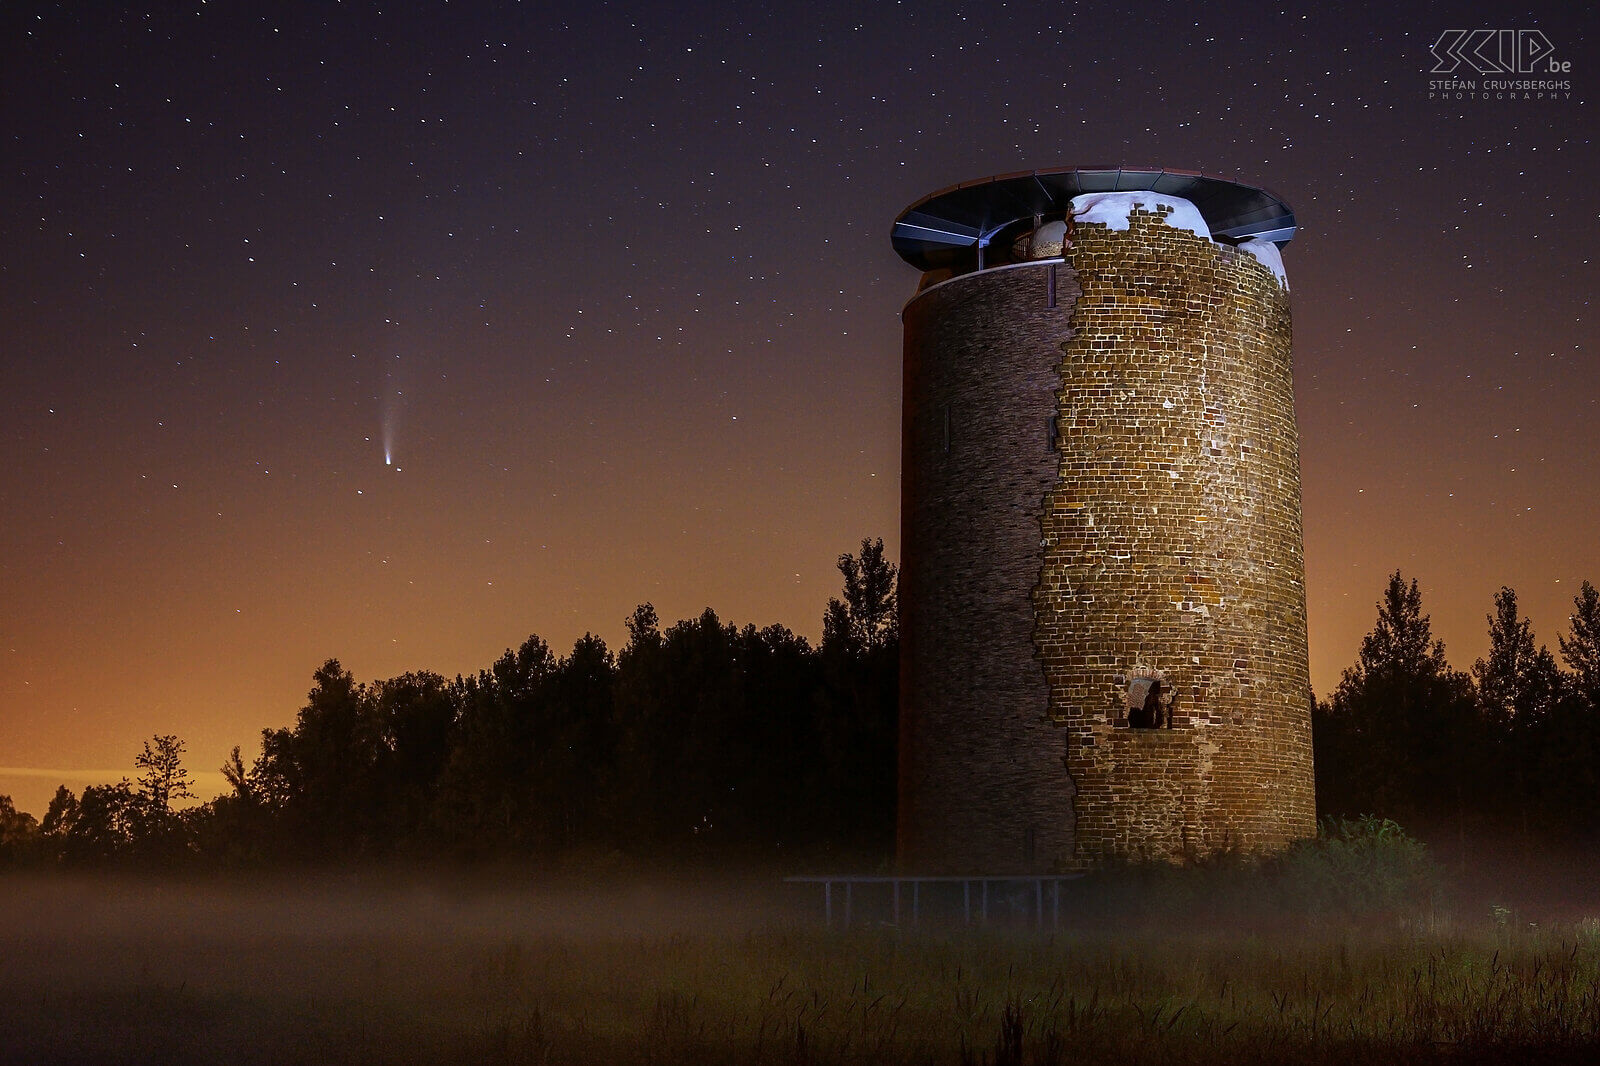 Hageland by night - Maiden's tower with comet NEOWISE In June 2022 were were able to see comet NEOWISE with its luminous tail in the starry sky. I went to the Maiden's Tower in our city Scherpenheuvel-Zichem to make some pictures. On the horizon to the left you can see comet NEOWISE. I tried to illuminate the tower in with a flashlight and LED lamp. Now we have to wait another 6800 years before we can observe the comet again. Stefan Cruysberghs